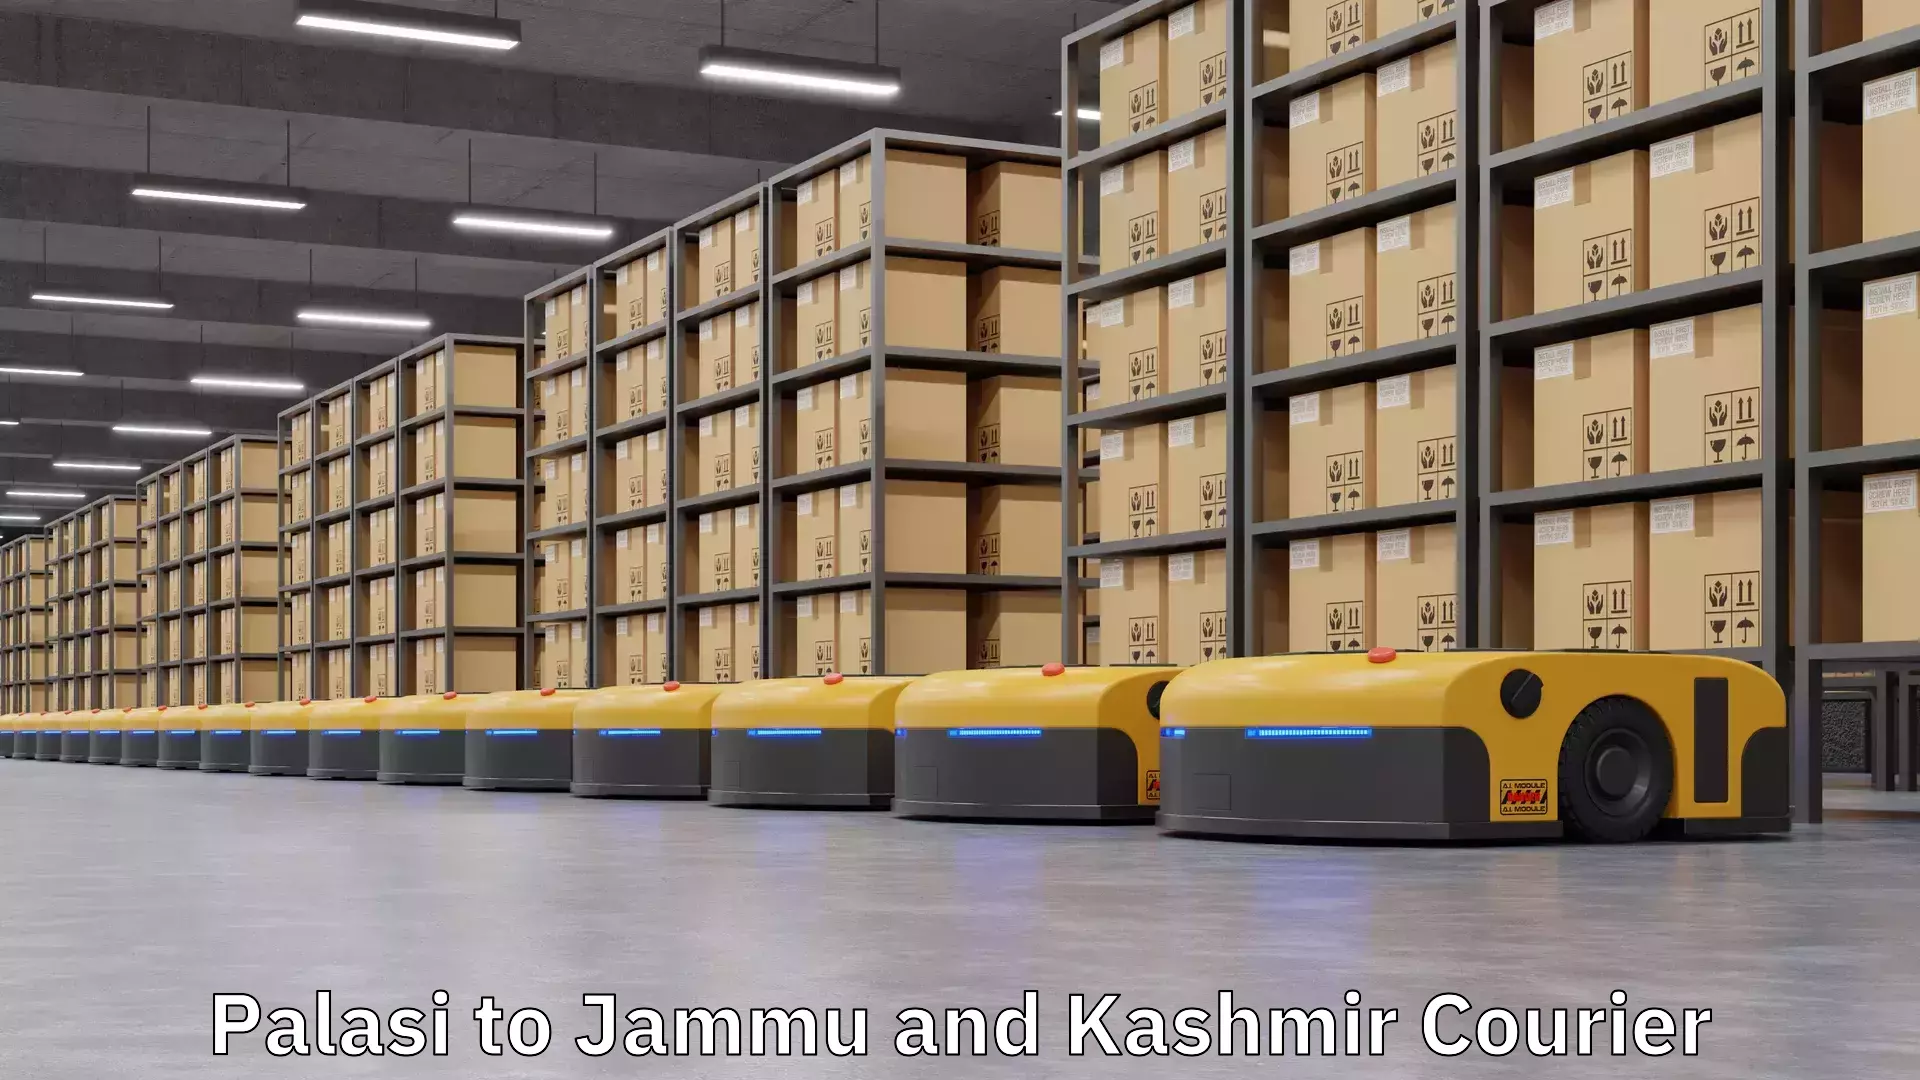 Global courier networks Palasi to Jammu and Kashmir